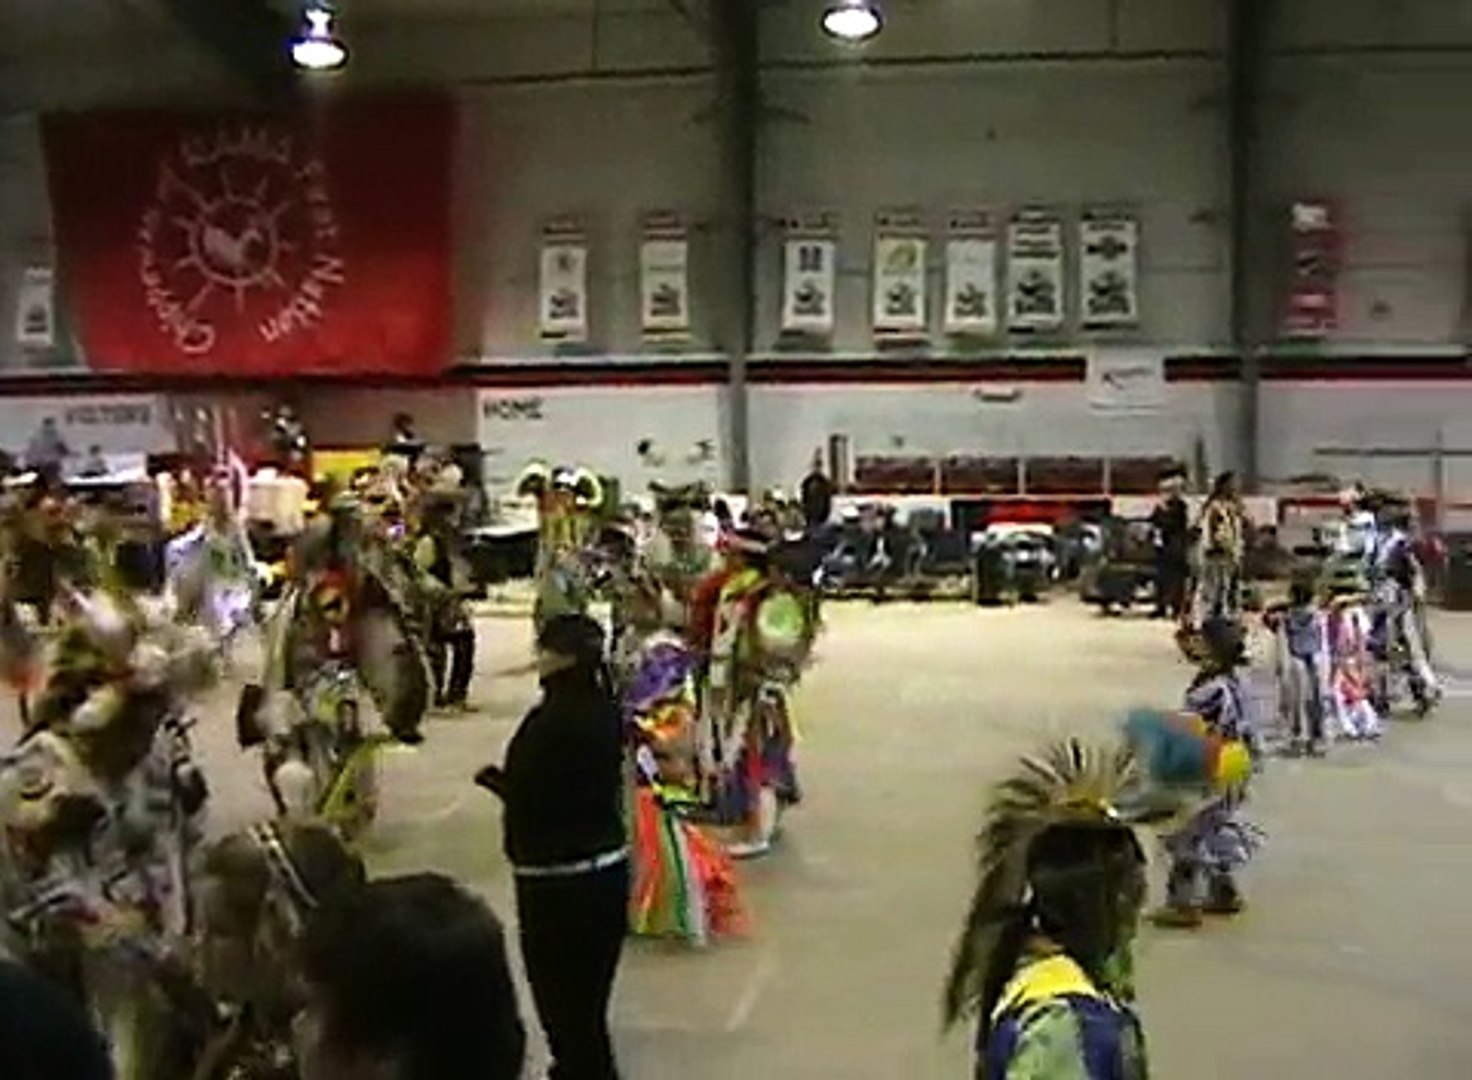 POW WOW MUSIC VIDEO ft. Armour Hill singers